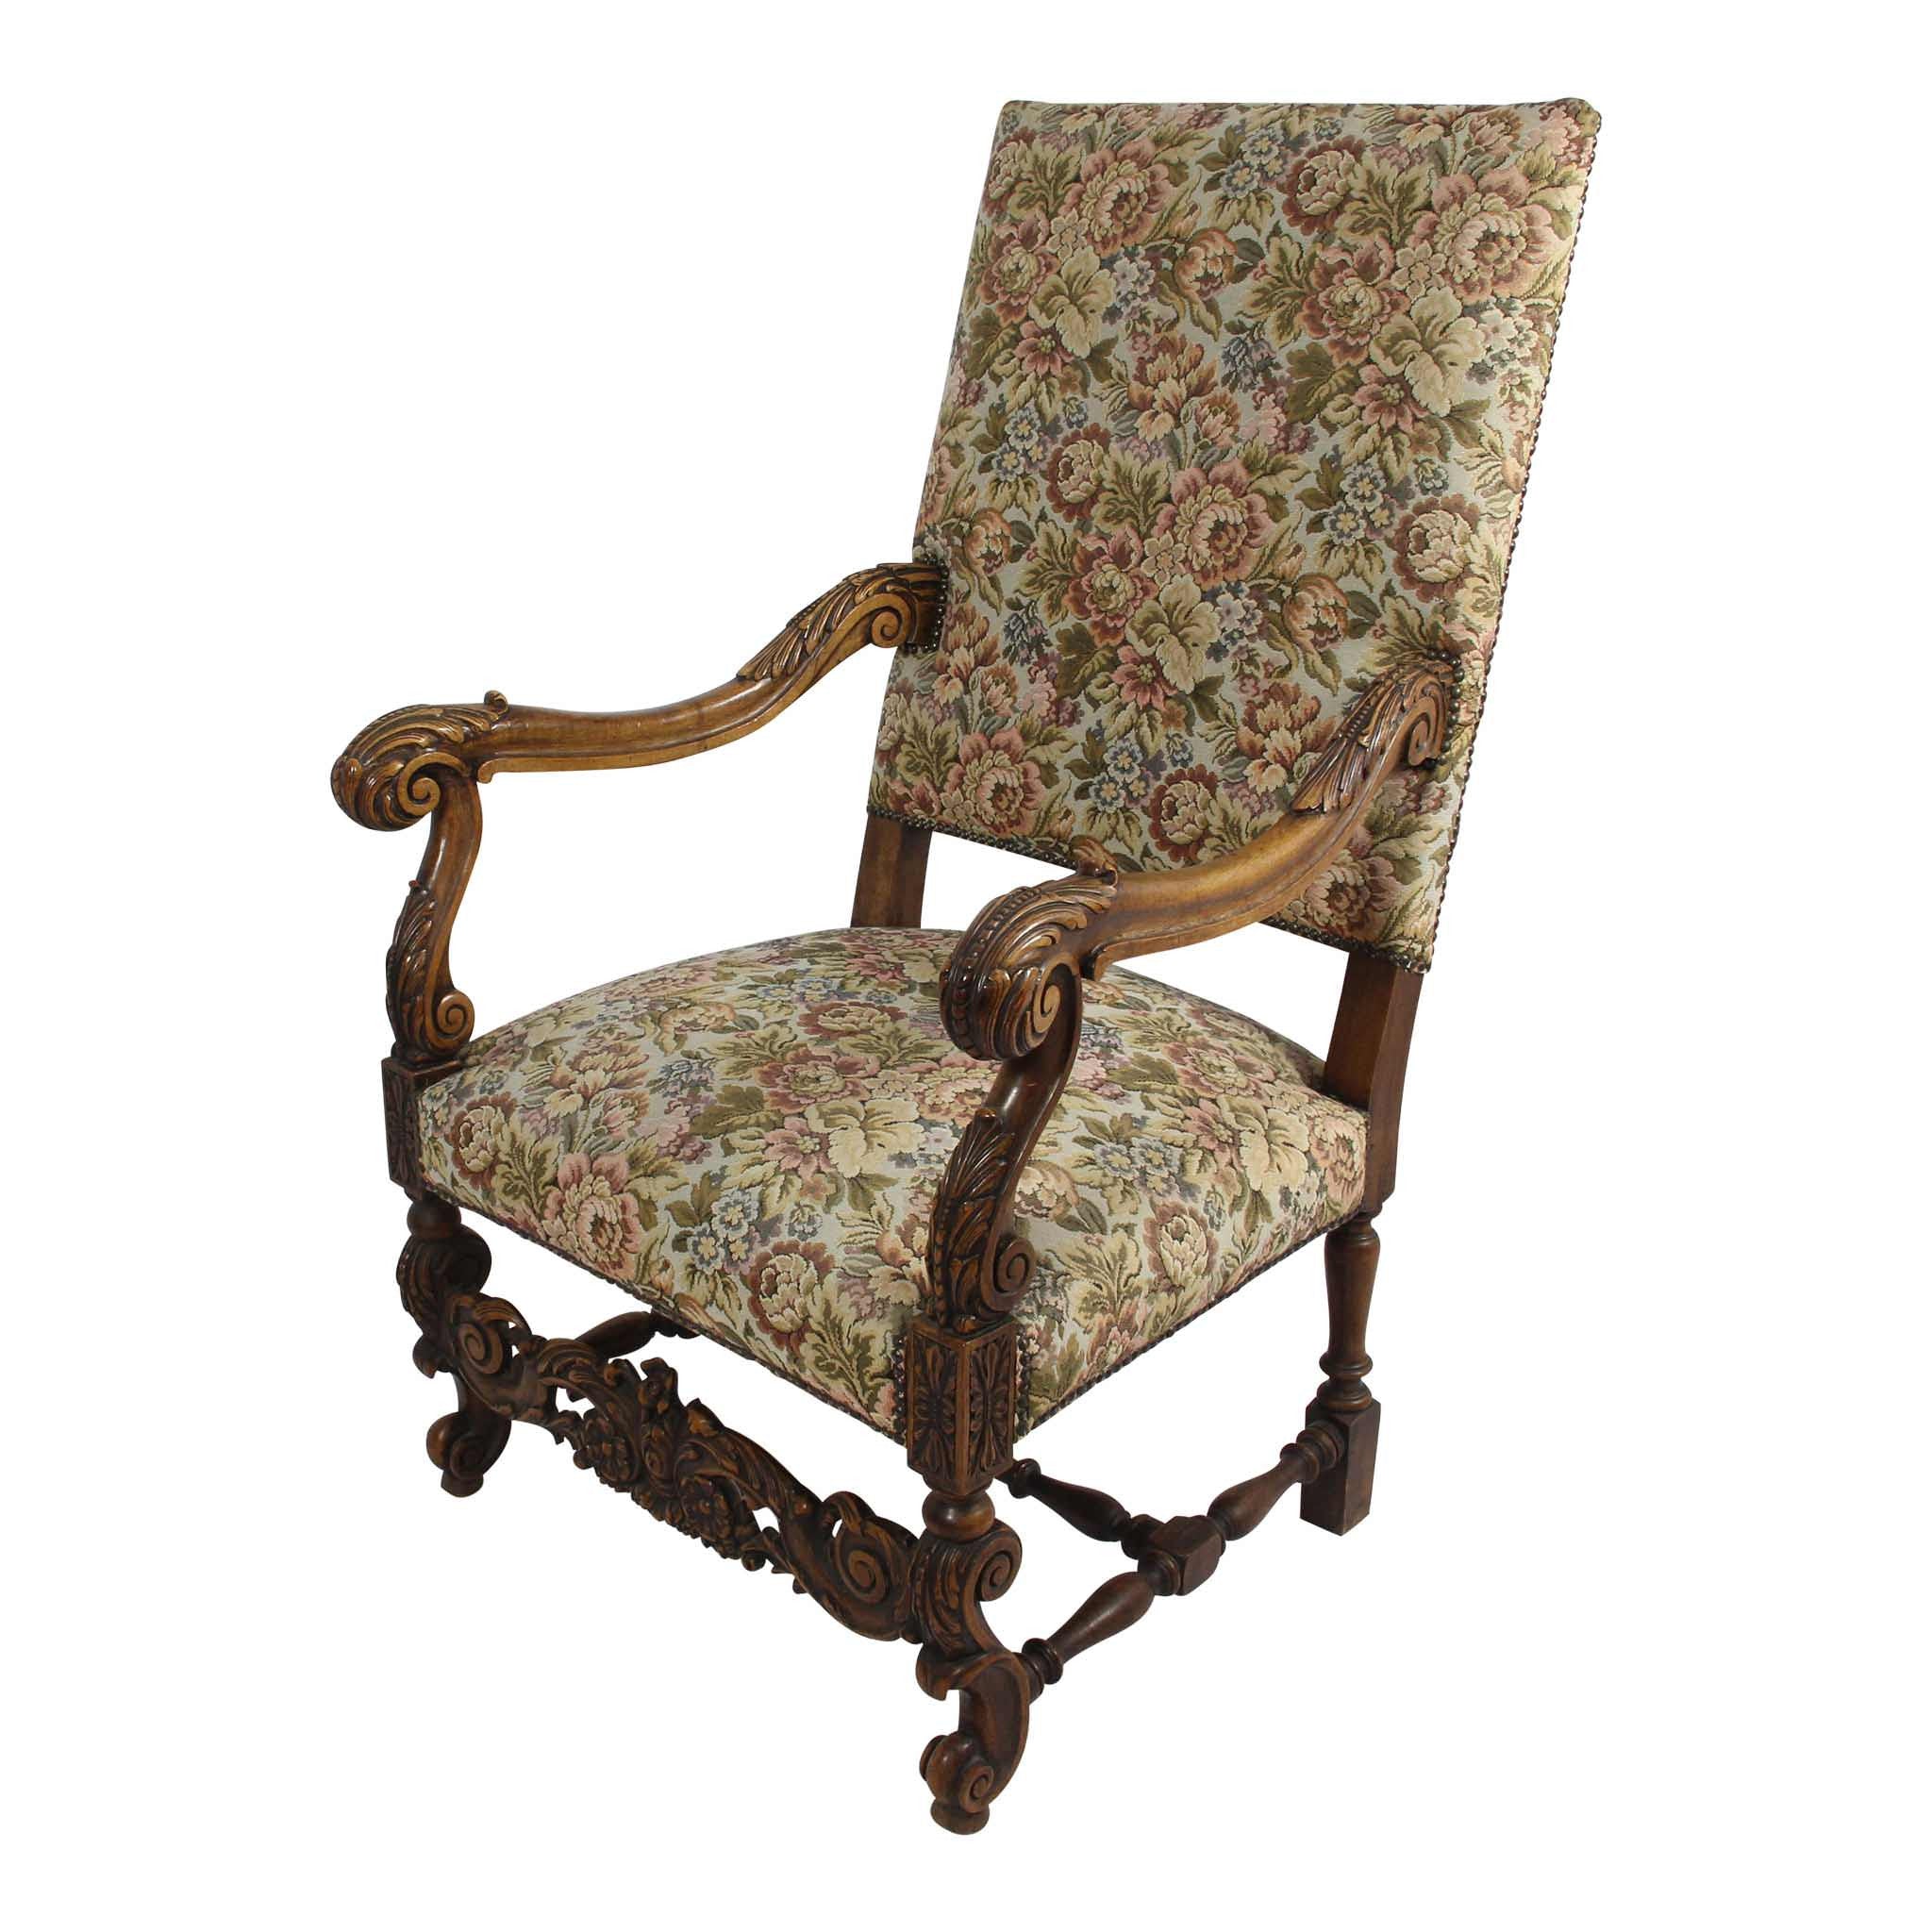 French Tapestry Chairs - Set of 2